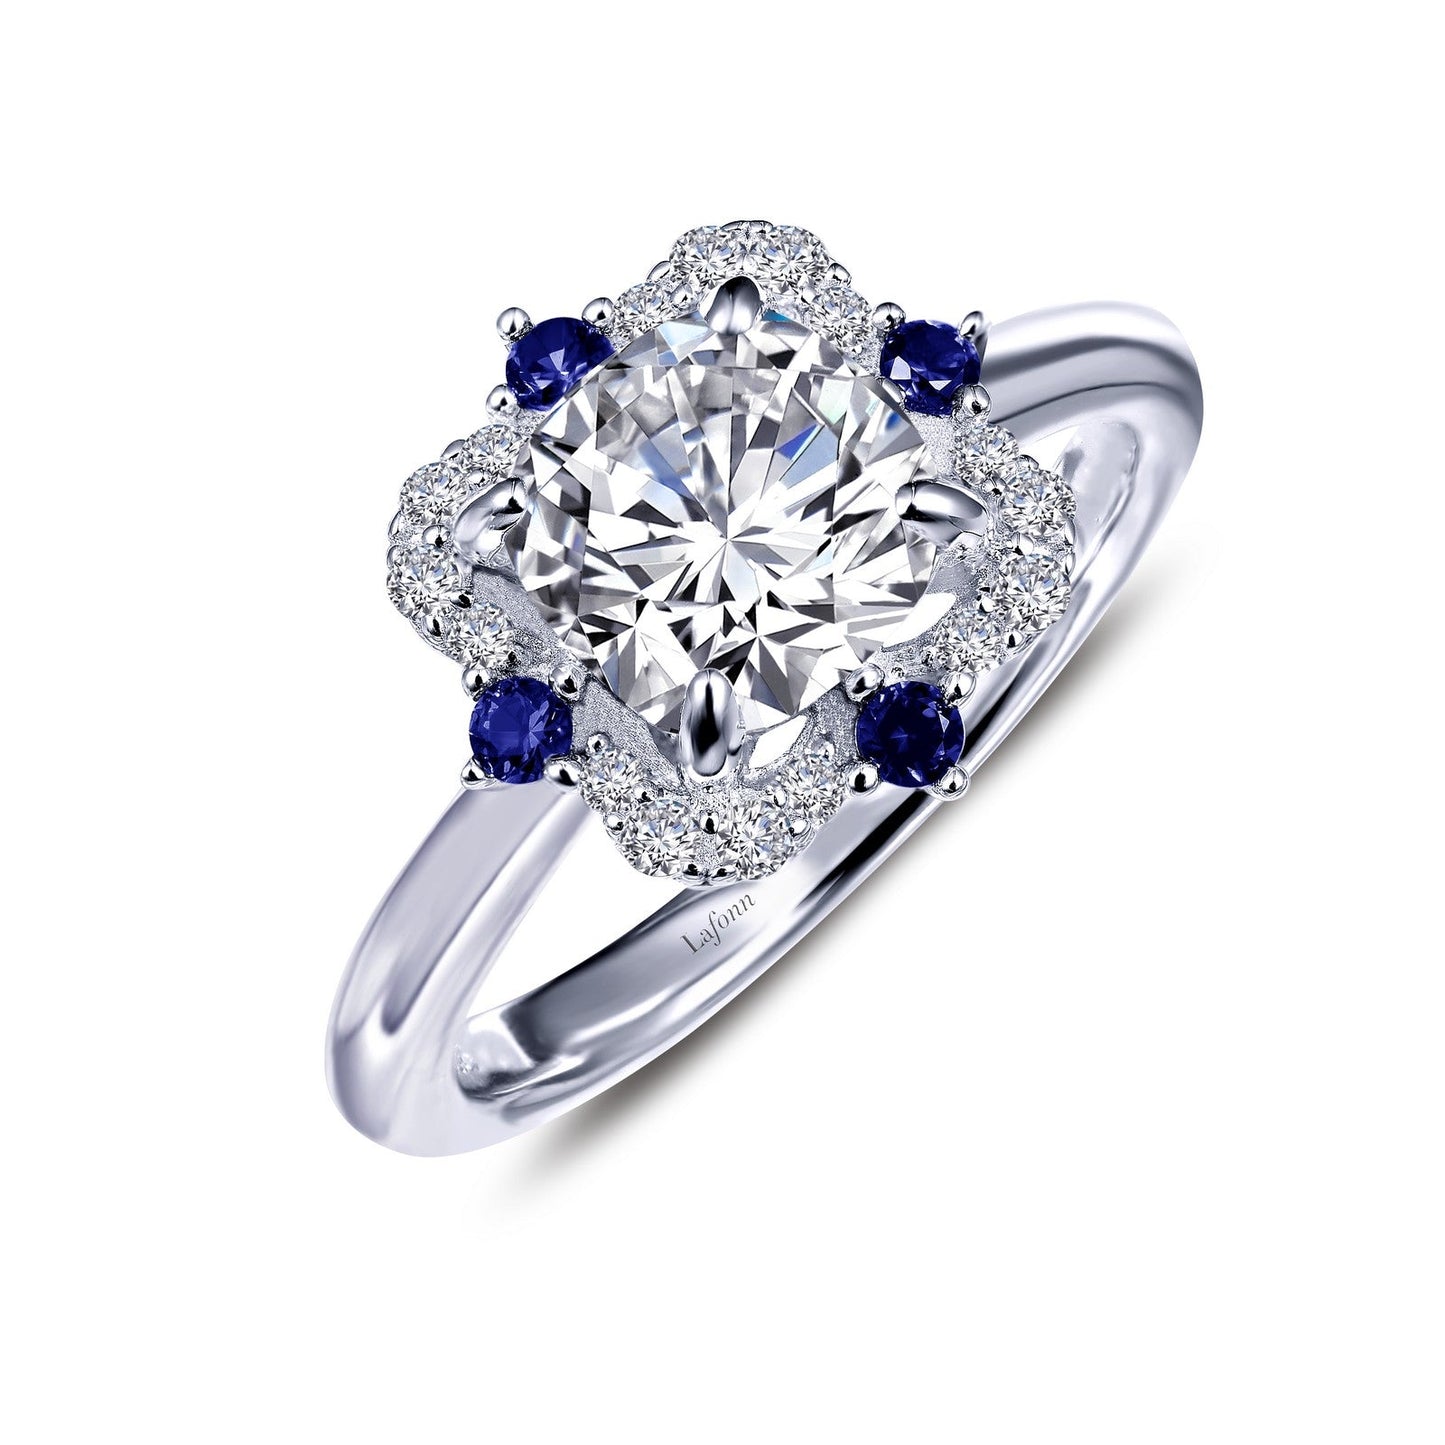 Load image into Gallery viewer, Lafonn Art Deco Inspired Engagement Ring 21 Stone Count R0227CSP10
